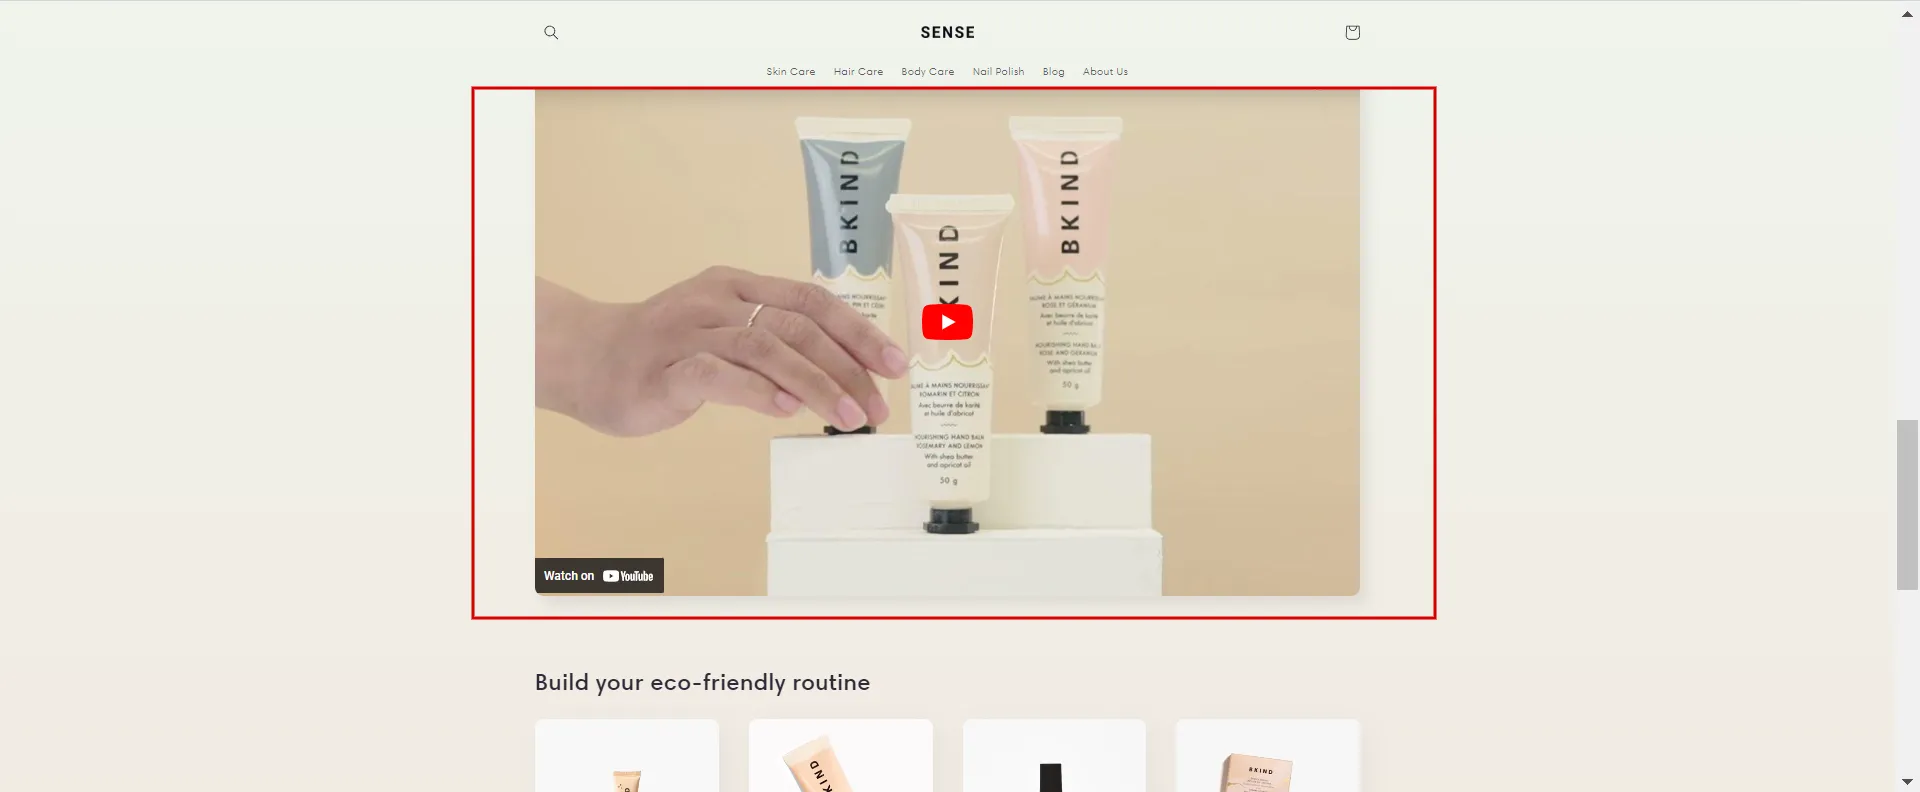 Embed a Youtube video in Shopify to provide product details